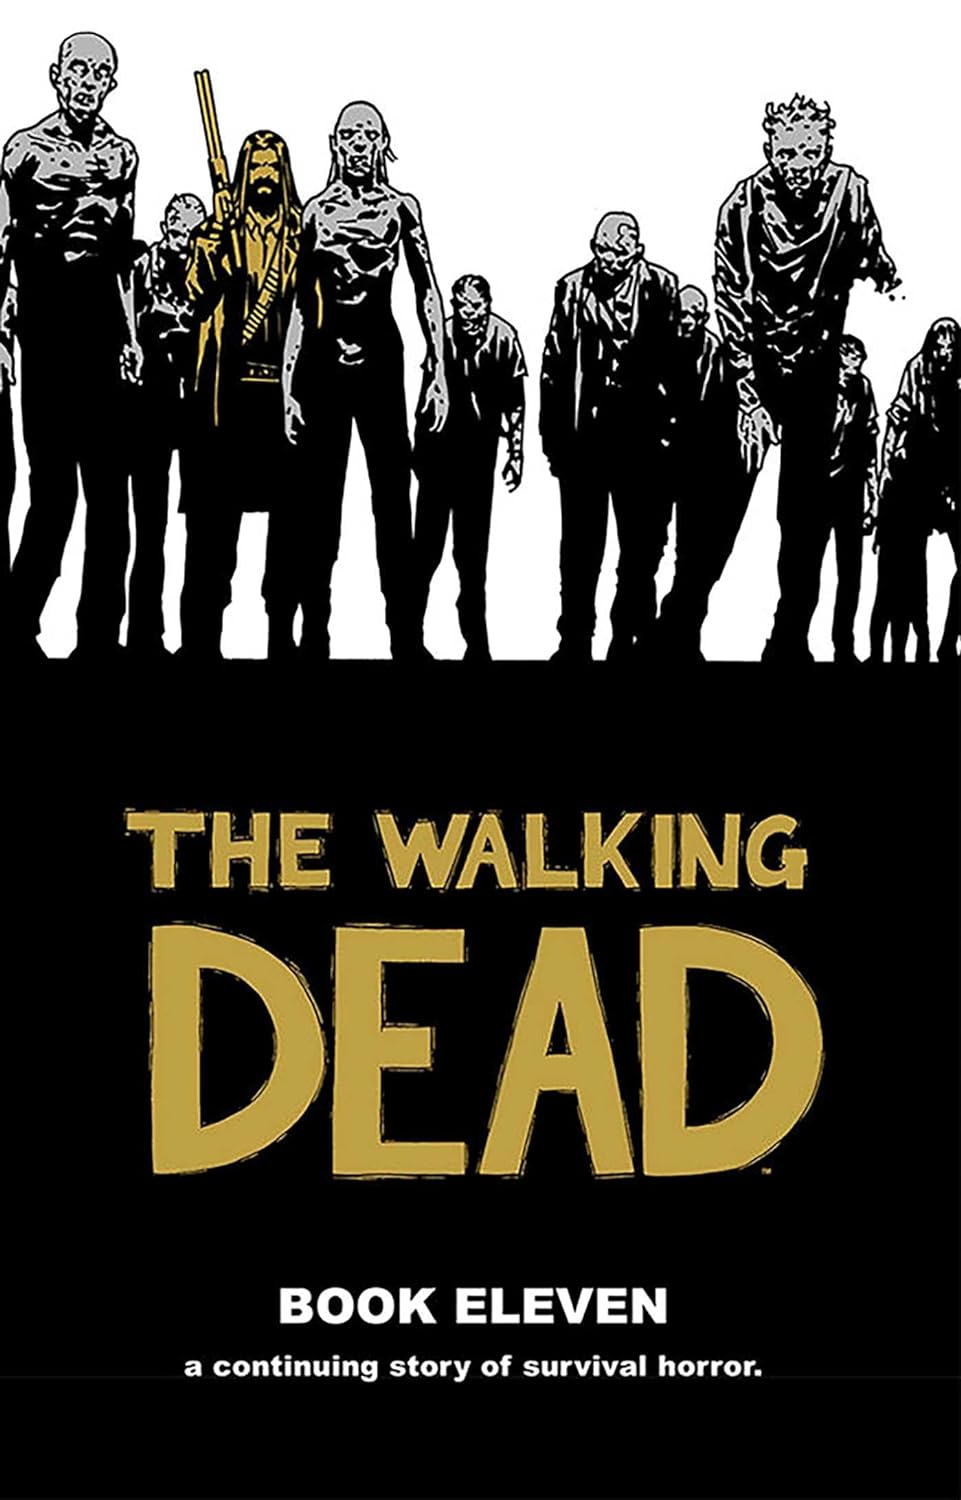 The Walking Dead Book Eleven Hardcover 2015